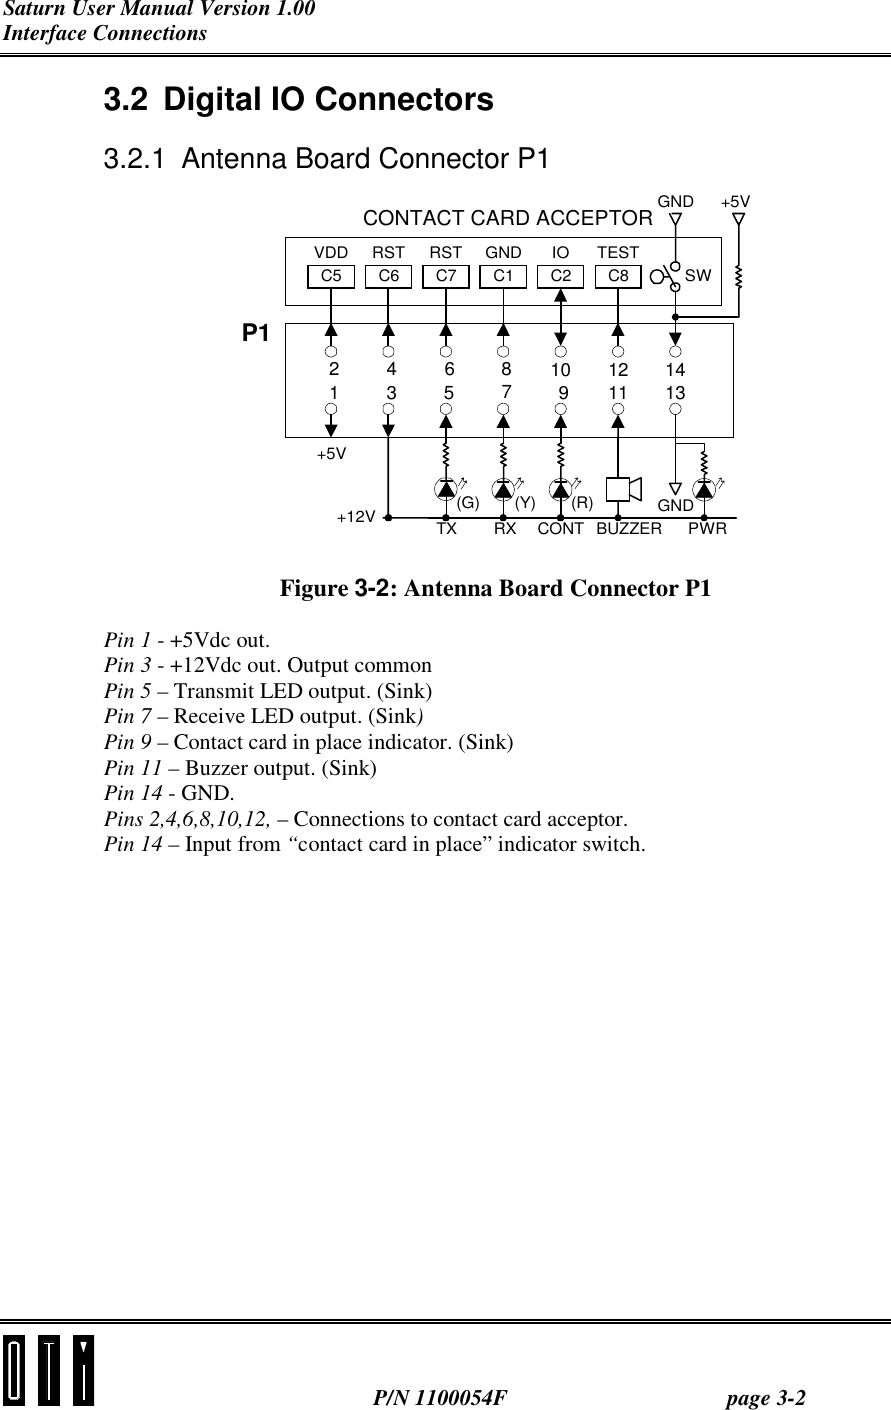 Saturn User Manual Version 1.00 Interface Connections  P/N 1100054F page 3-2 3.2 Digital IO Connectors 3.2.1  Antenna Board Connector P1 2413685710912111413GNDRXTX+5V+12V (G) (Y) (R)CONT BUZZERC5 C6 C7 C1 C2 C8 SW+5VGNDVDD RST RST GND IO TESTCONTACT CARD ACCEPTORP1PWR Figure 3-2: Antenna Board Connector P1 Pin 1 - +5Vdc out. Pin 3 - +12Vdc out. Output common Pin 5 – Transmit LED output. (Sink) Pin 7 – Receive LED output. (Sink) Pin 9 – Contact card in place indicator. (Sink) Pin 11 – Buzzer output. (Sink) Pin 14 - GND. Pins 2,4,6,8,10,12, – Connections to contact card acceptor. Pin 14 – Input from “contact card in place” indicator switch. 